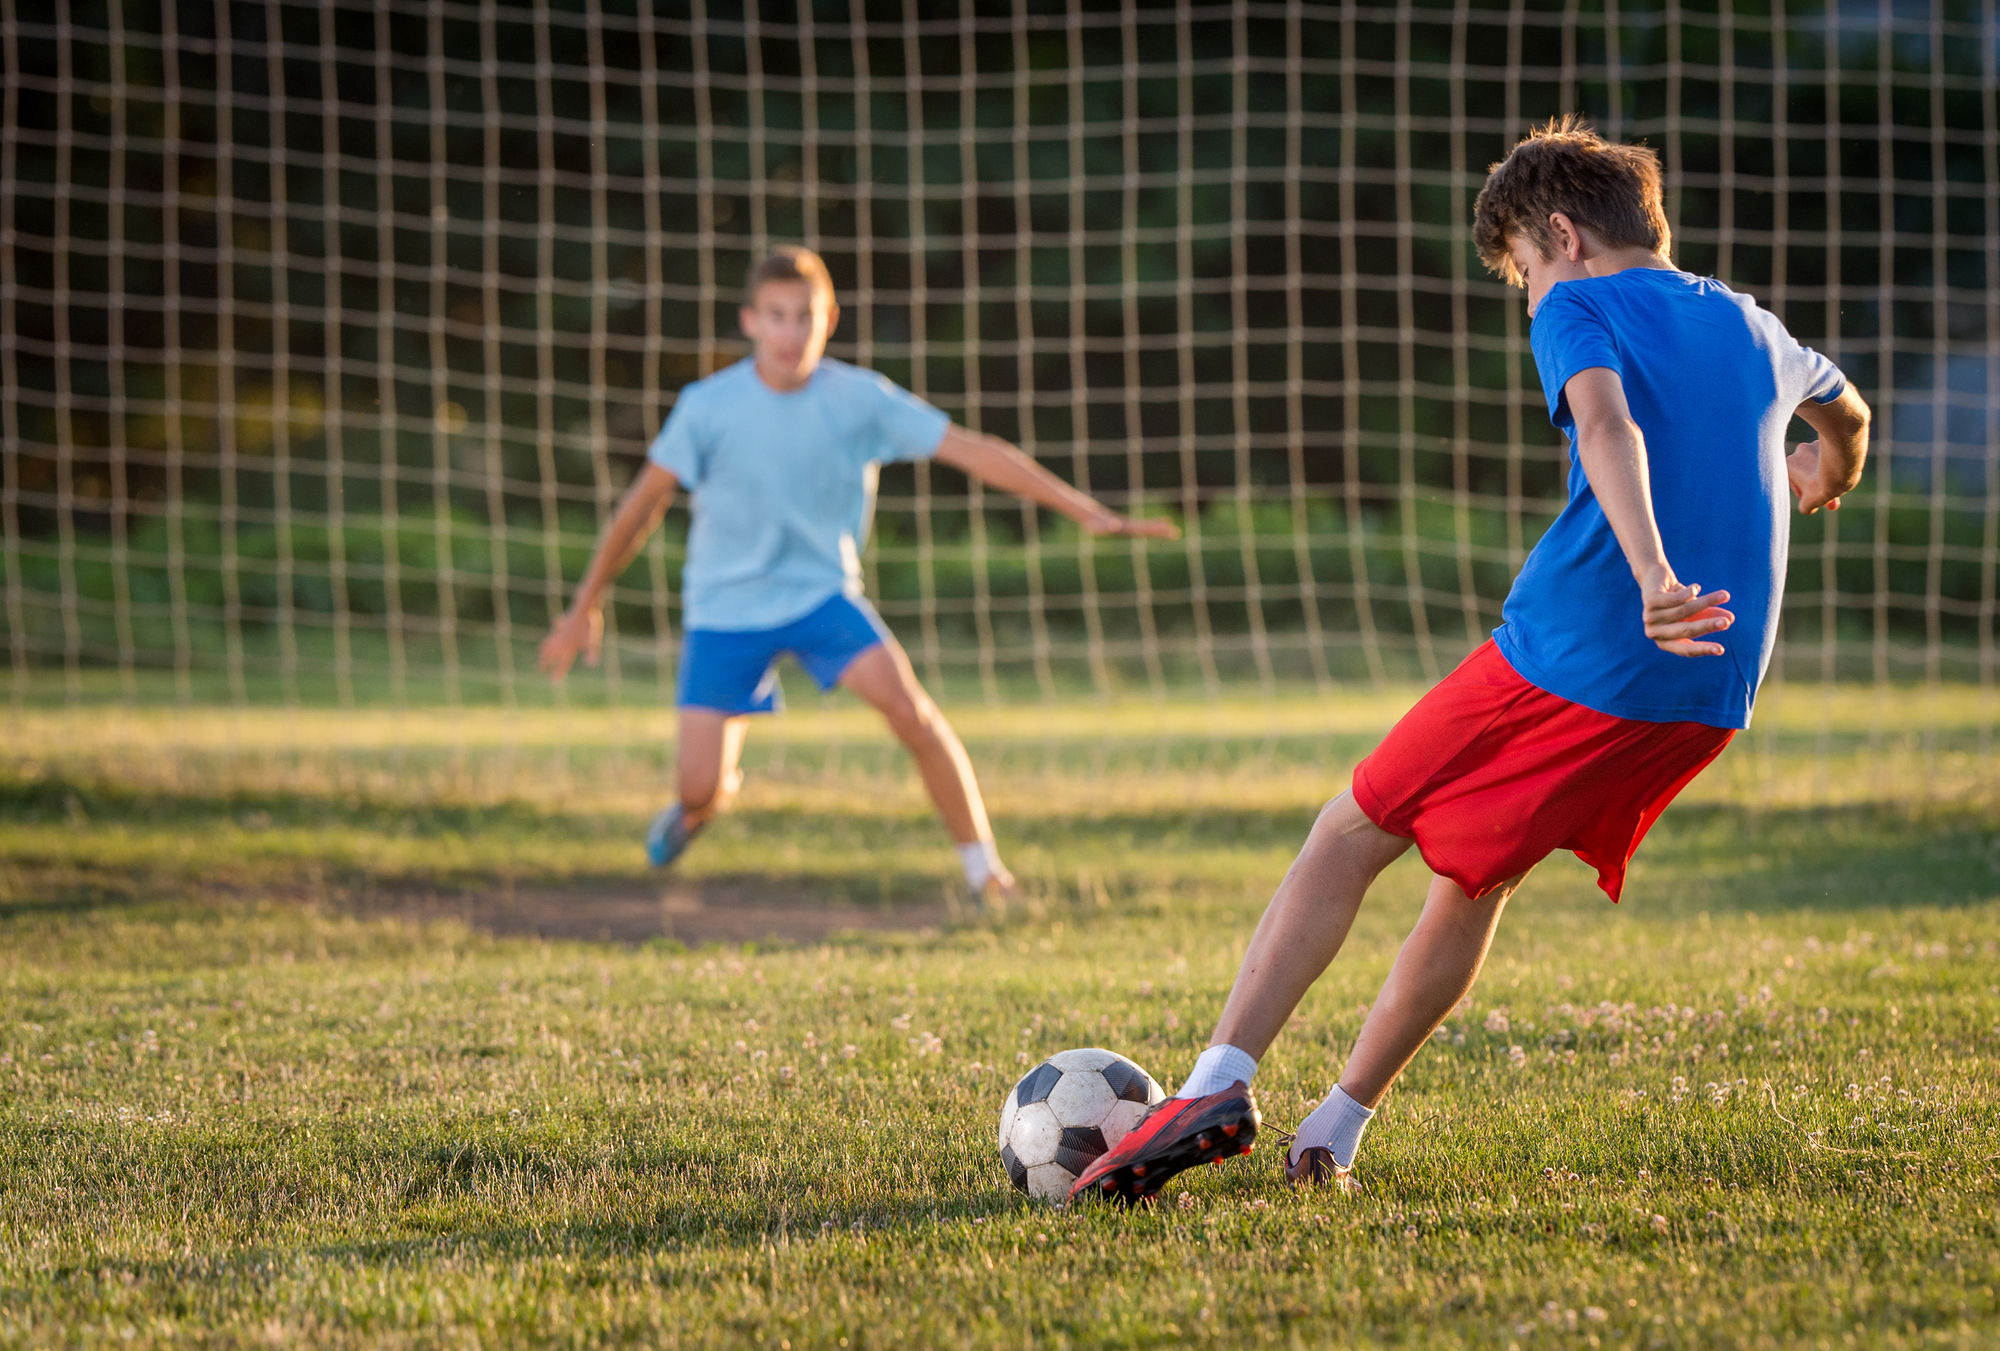 Kids sports injuries are common